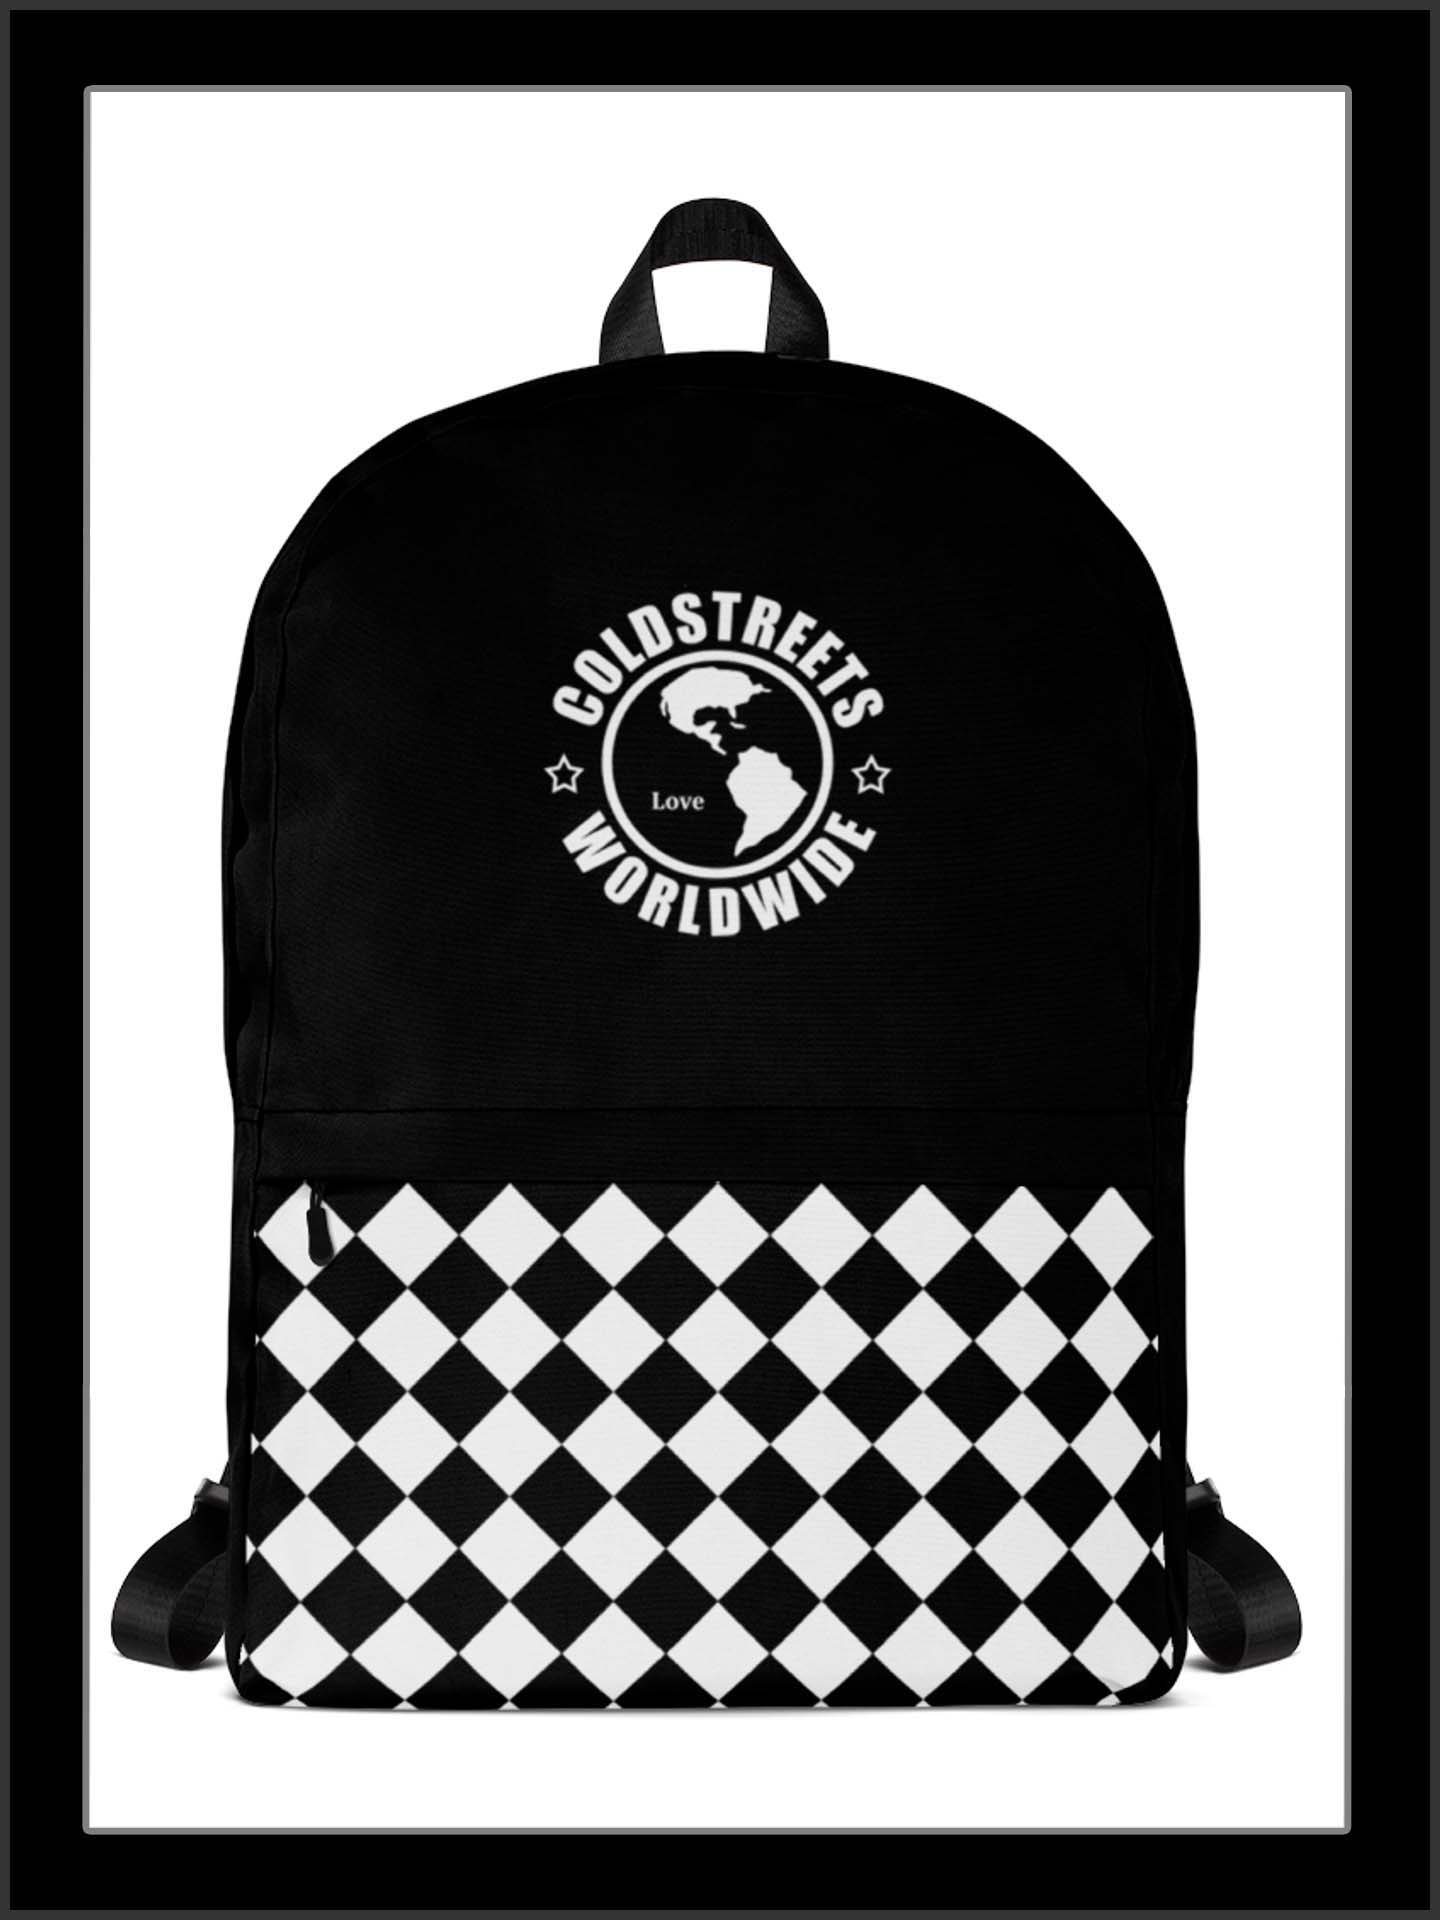 Cold Streets Tennessee Backpacks